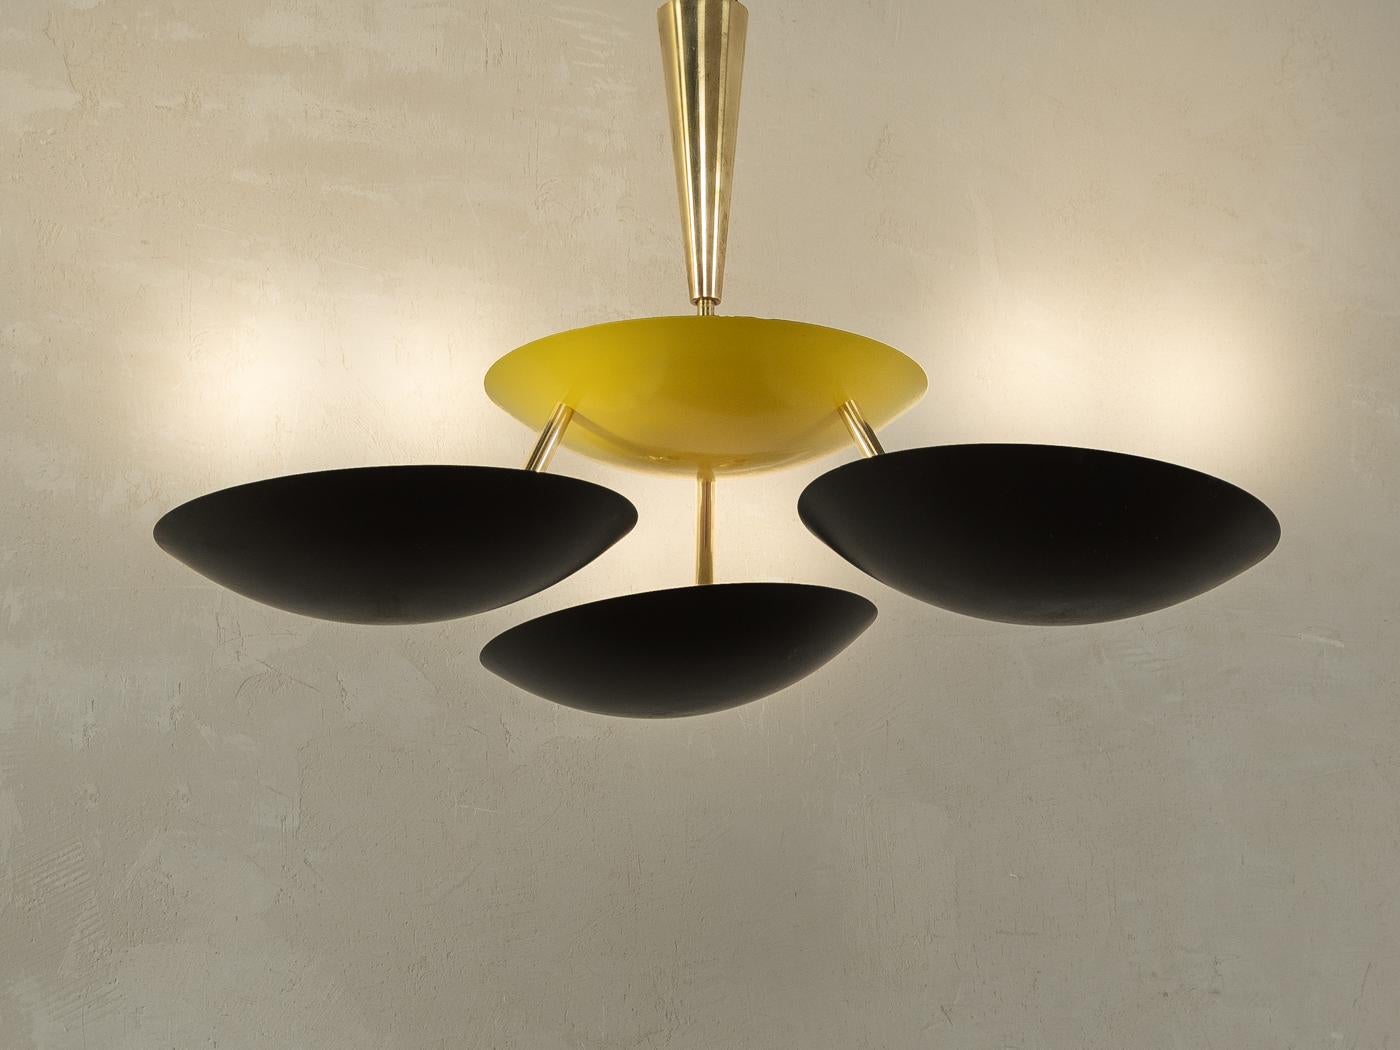 Rare three flame ceiling lamp by Stilnovo from the 1950s. High-quality metal frame with three lampshades made of pressed stainless steel sheet in yellow and black. Made in Italy, manufacturer: Stilnovo
Condition & Size

Good condition with slight